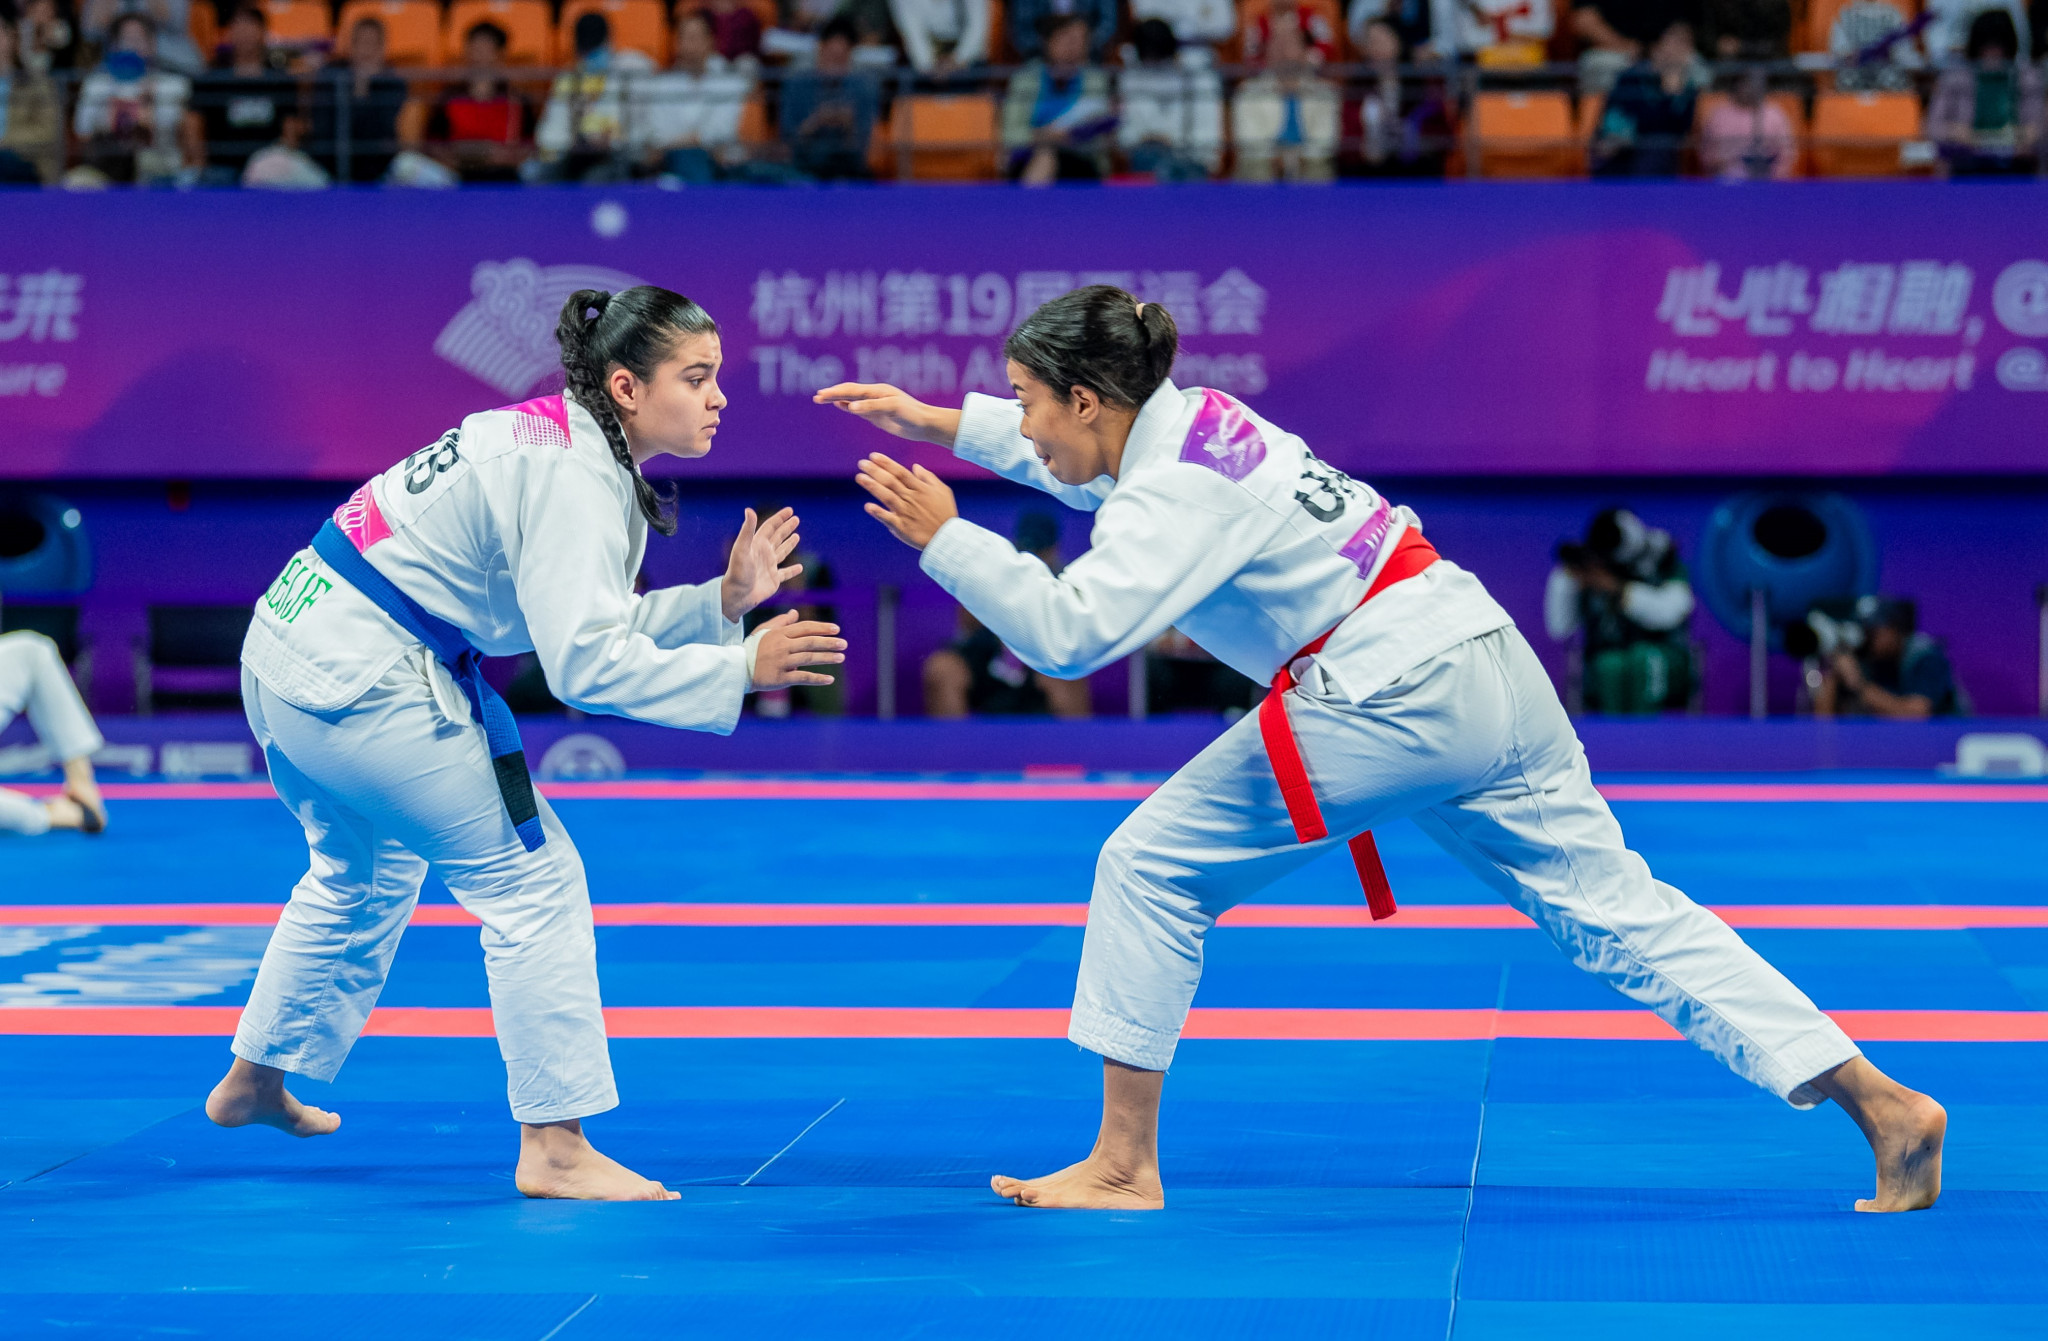 Ju-jitsu appeared at the Asian Games for a second time at Hangzhou 2022 following its 2018 debut with an increase in women's competition ©JJIF